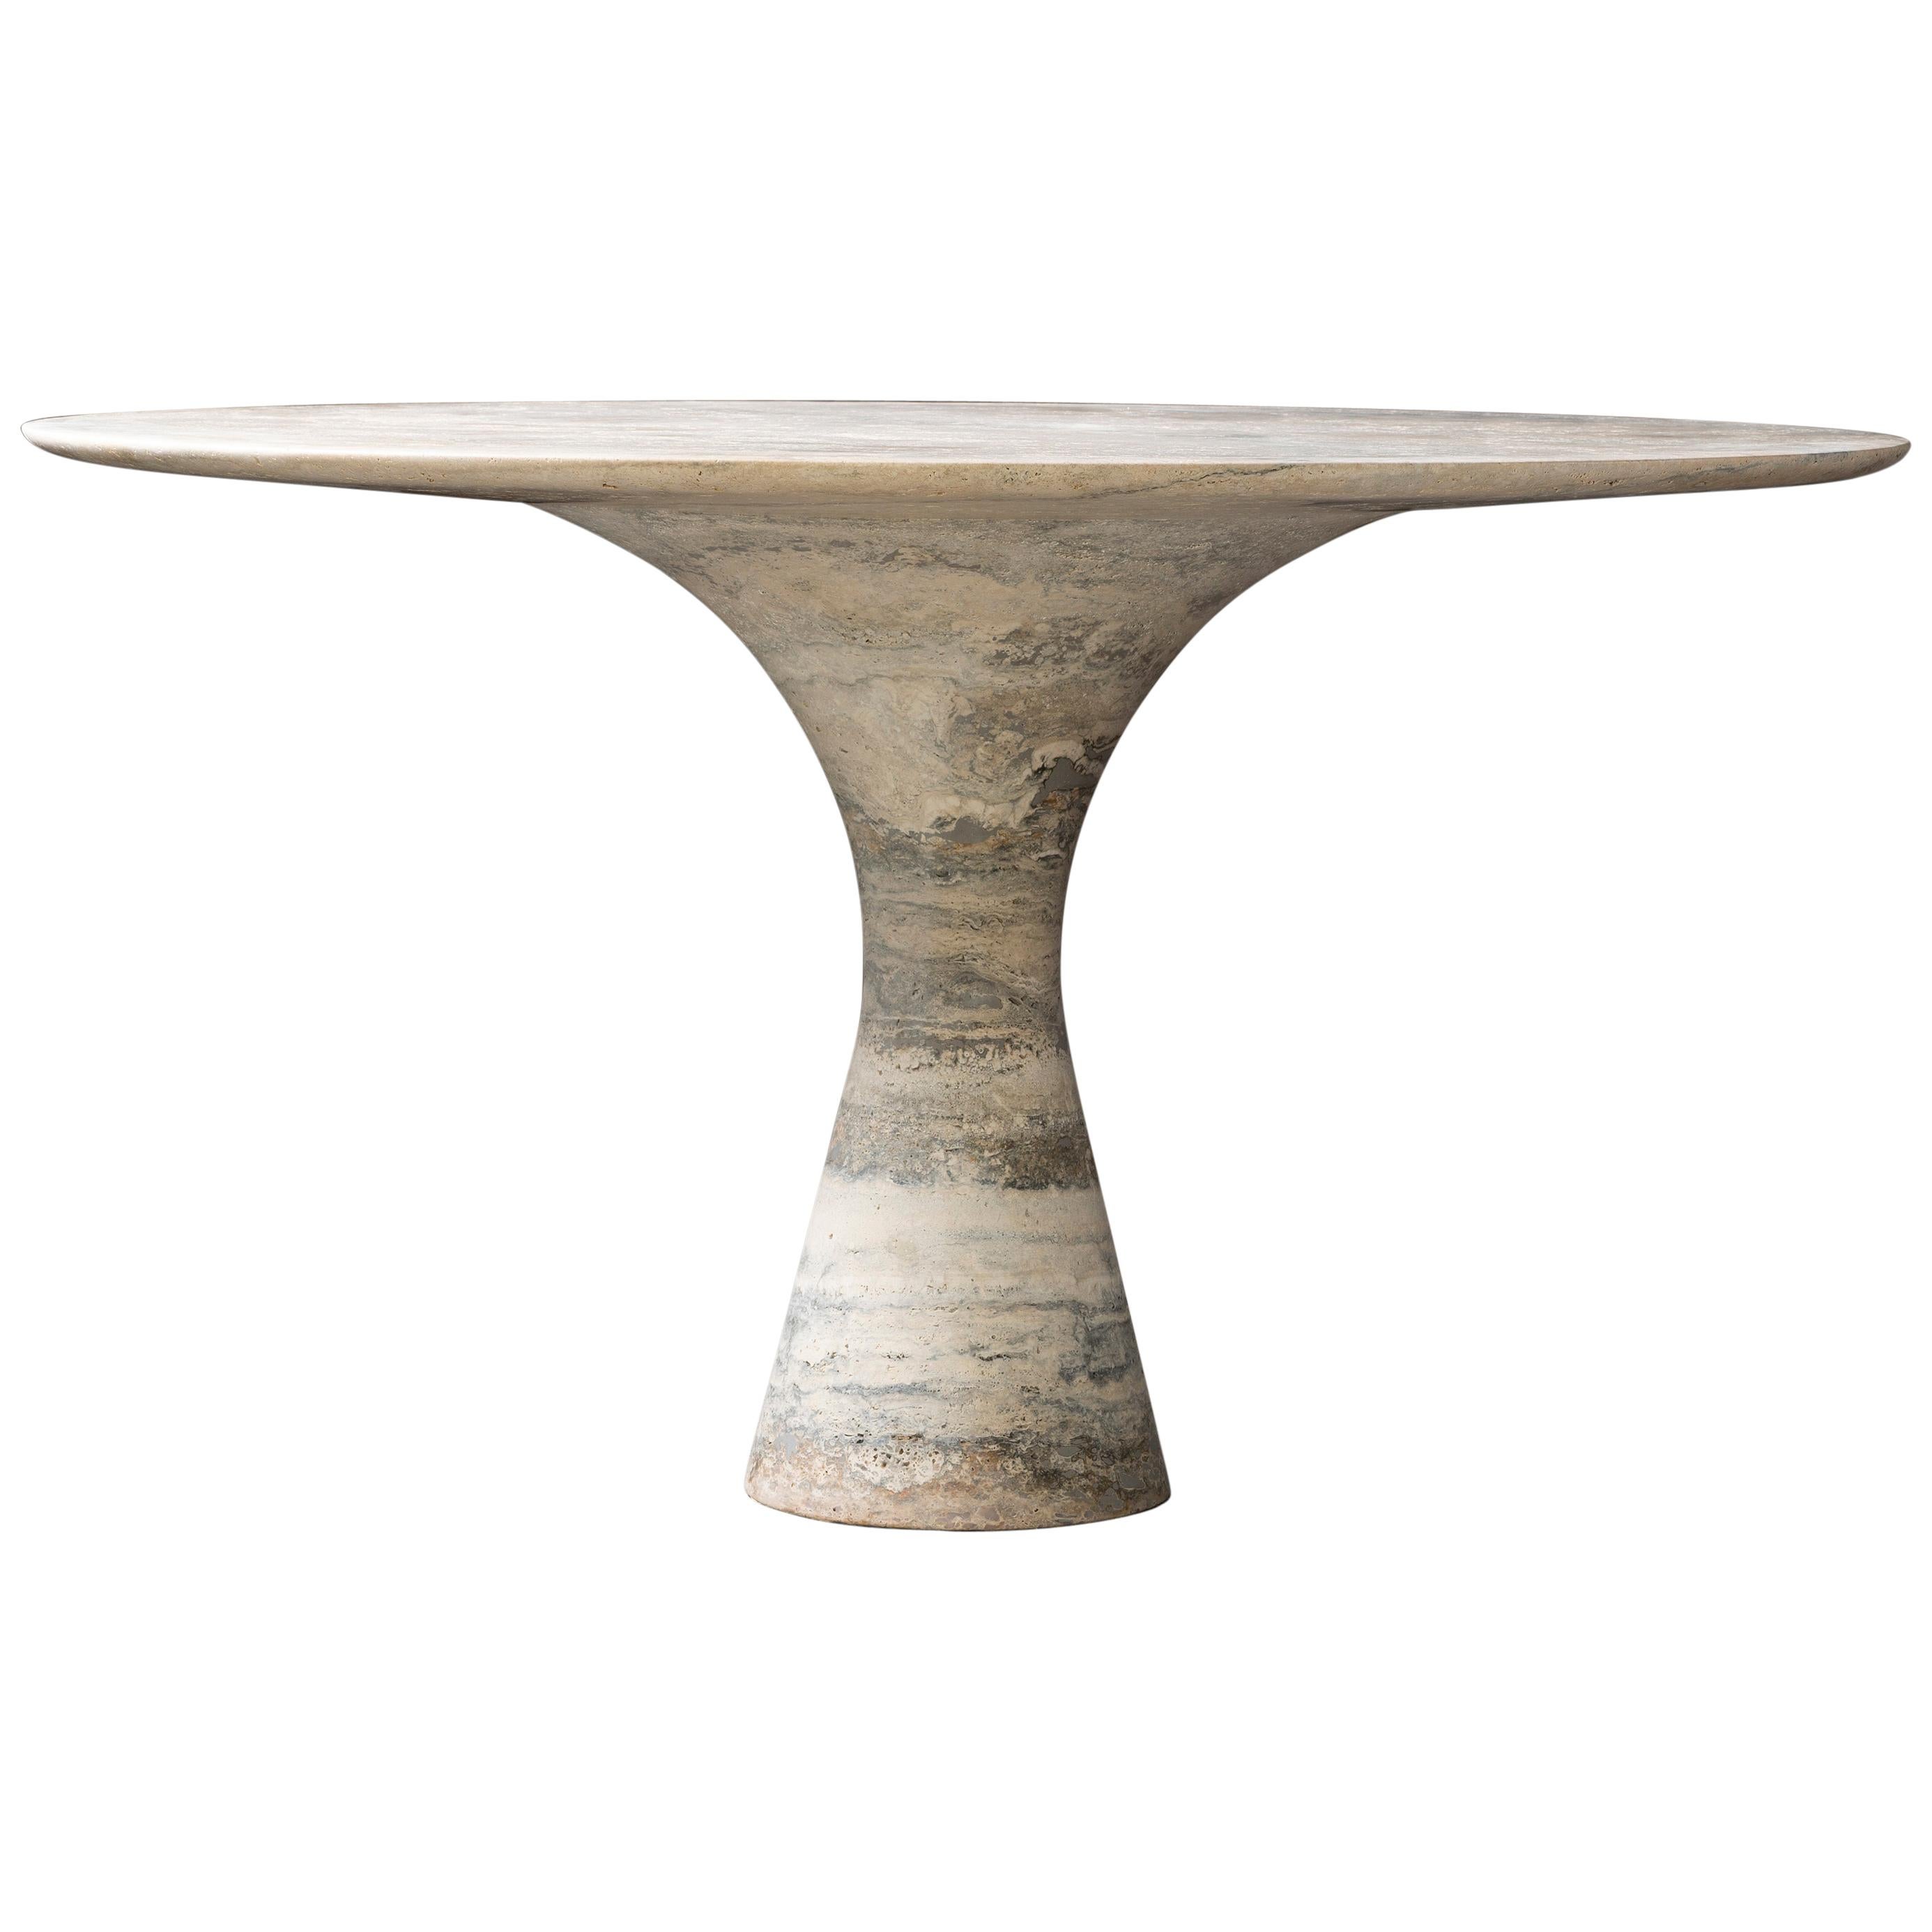 Travertino Silver Refined Contemporary Marble Dining Table 250/75
Dimensions: 250 x 160 x 75 cm
Materials; Travertino silver

Angelo is the essence of a round table in natural stone, a sculptural shape in robust material with elegant lines and